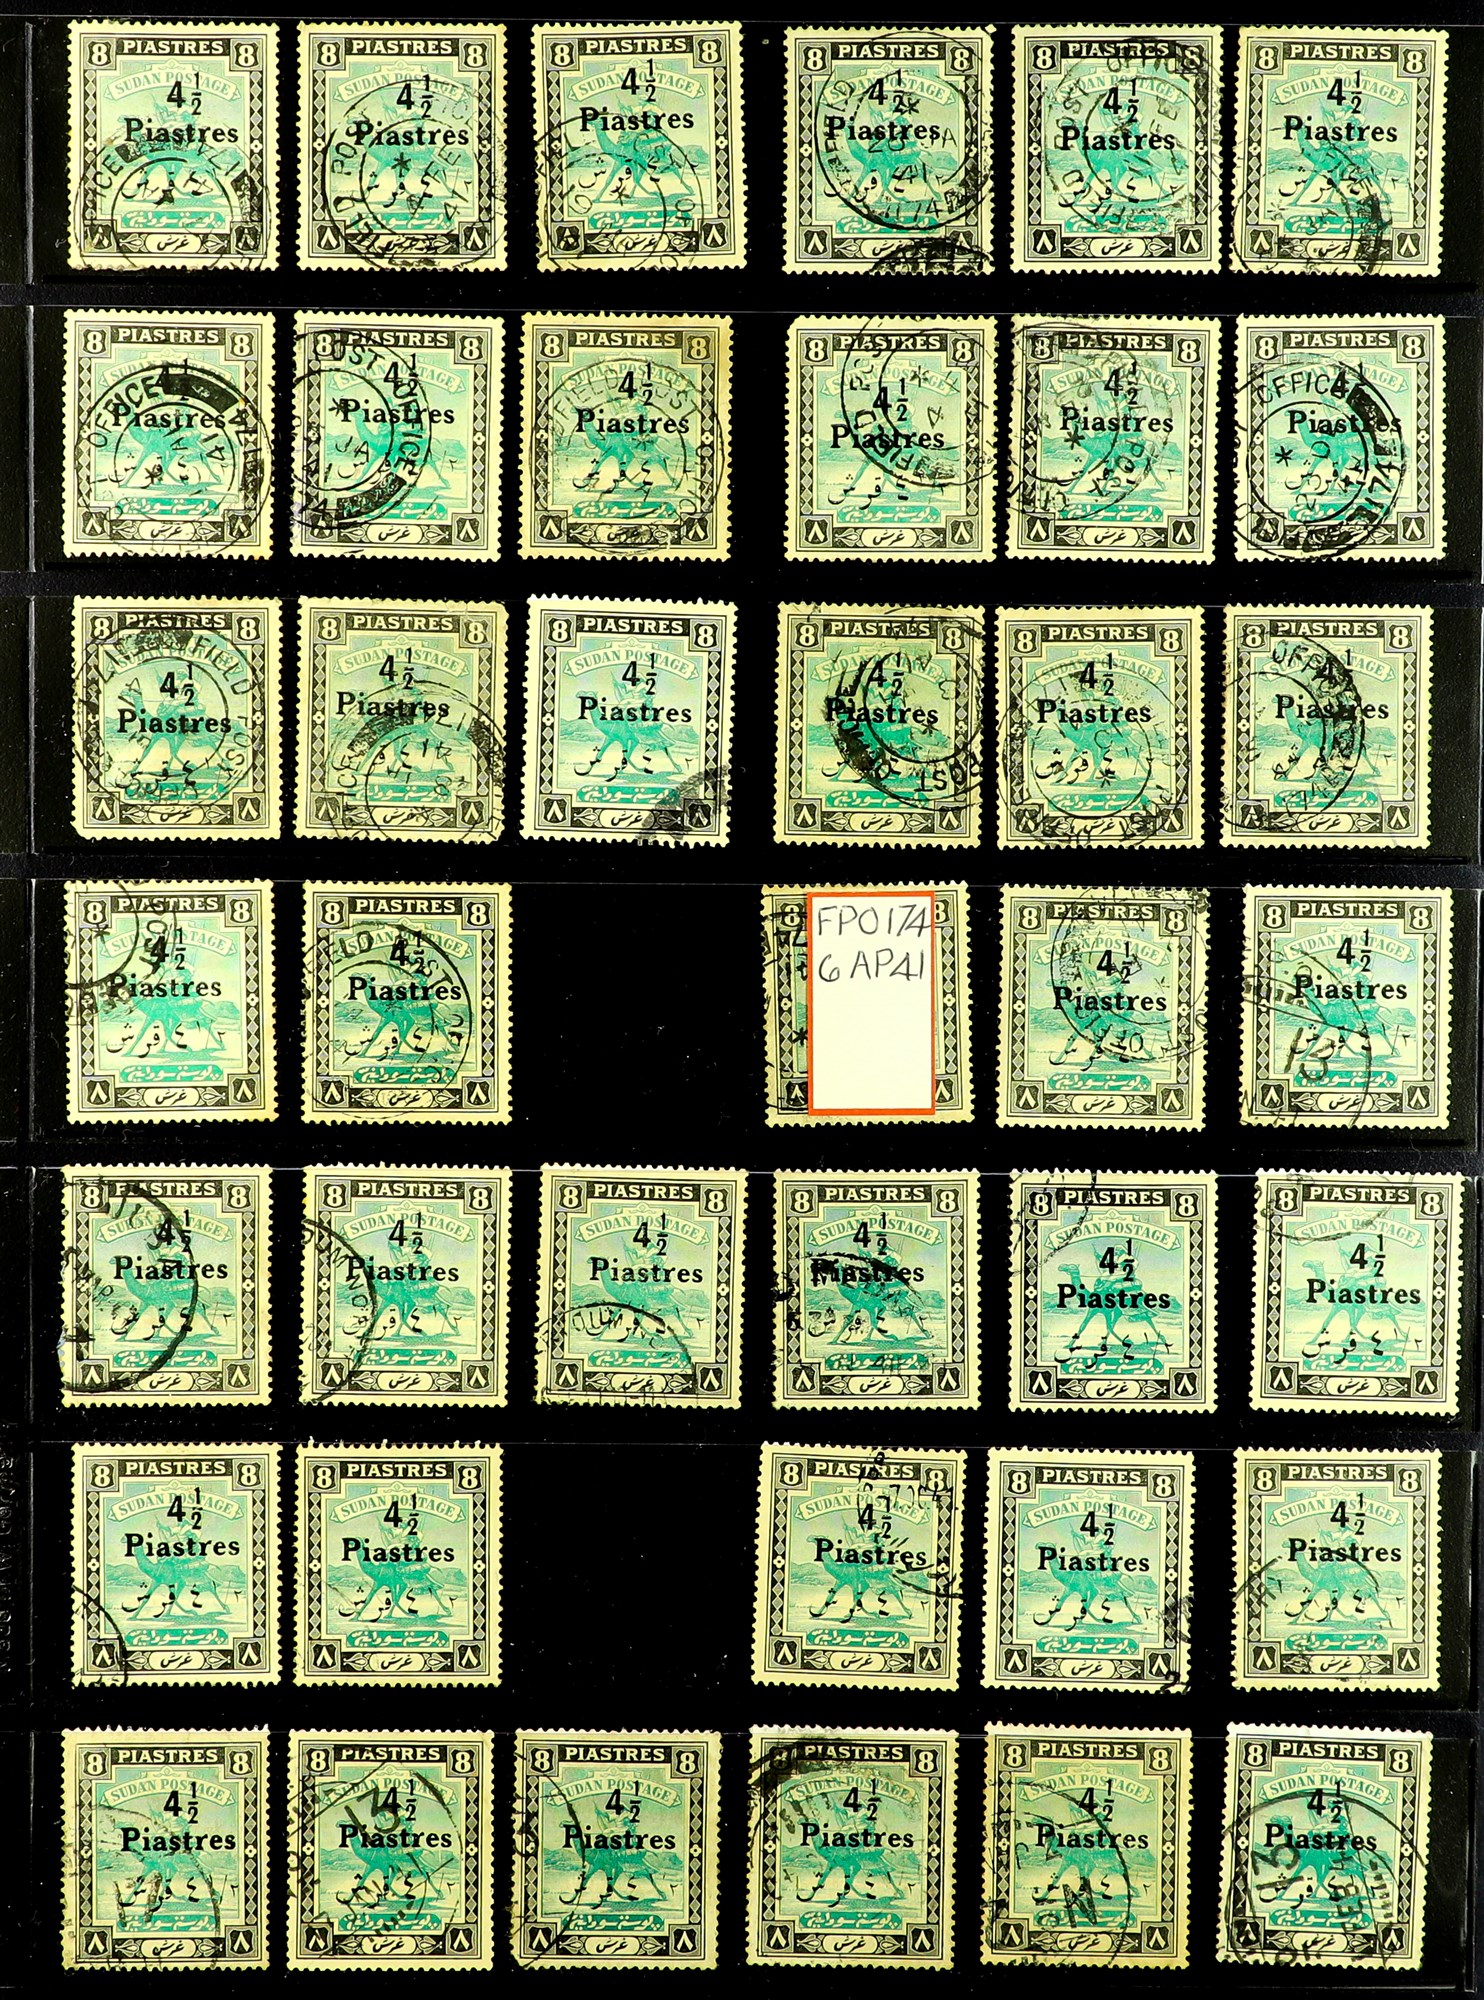 SUDAN 1940-41 SPECIALIZED COLLECTION of the 4½p on 8p emerald and black (SG 80) selected for - Image 3 of 6